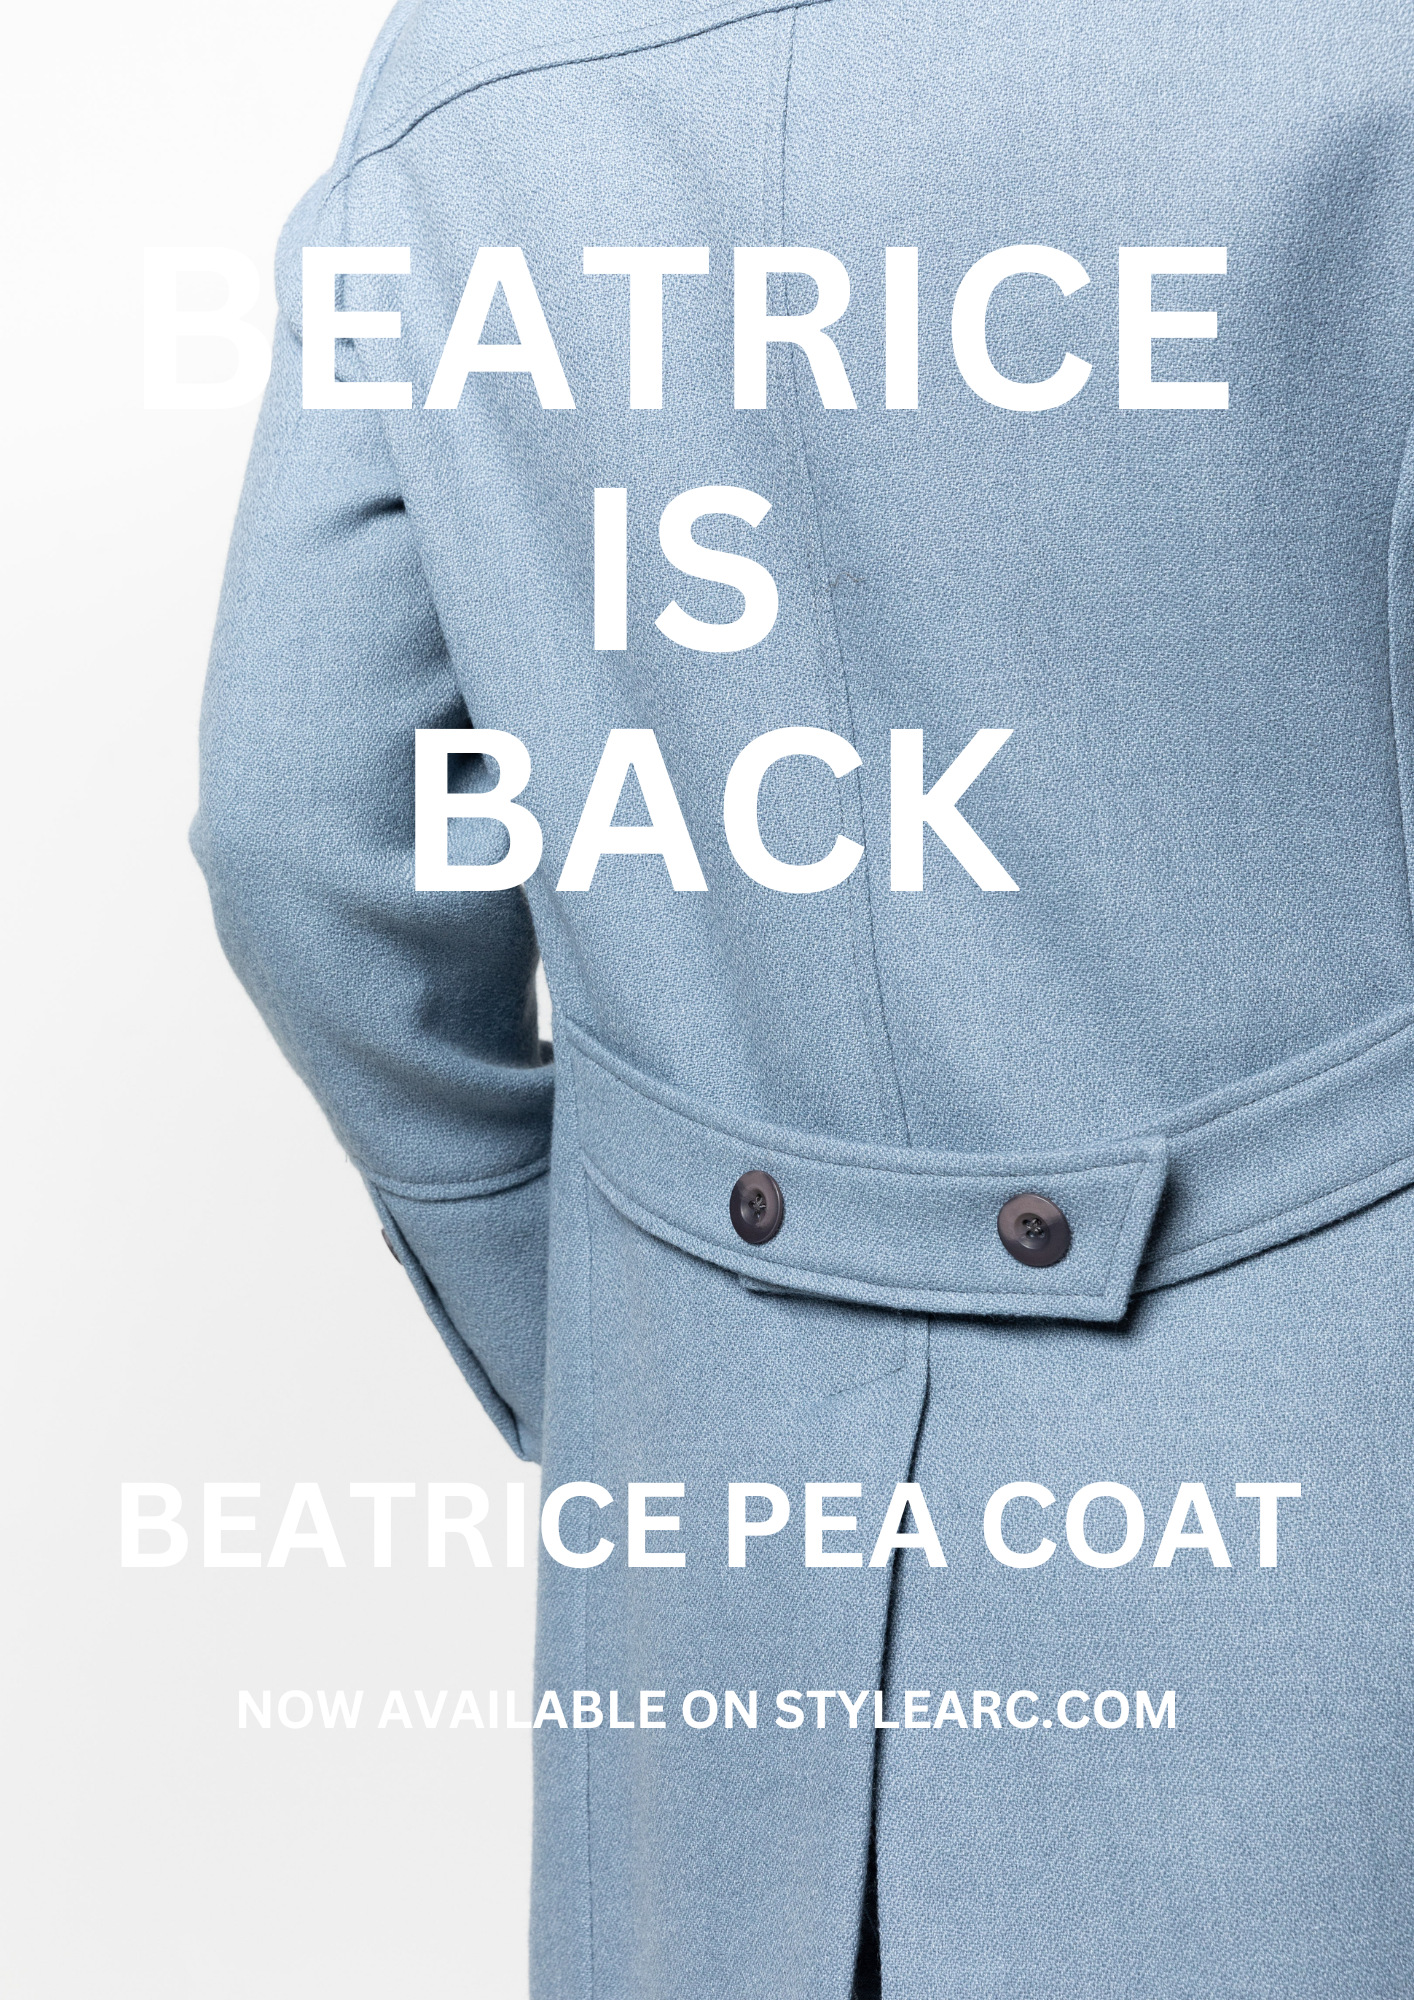 Beatrice is back!